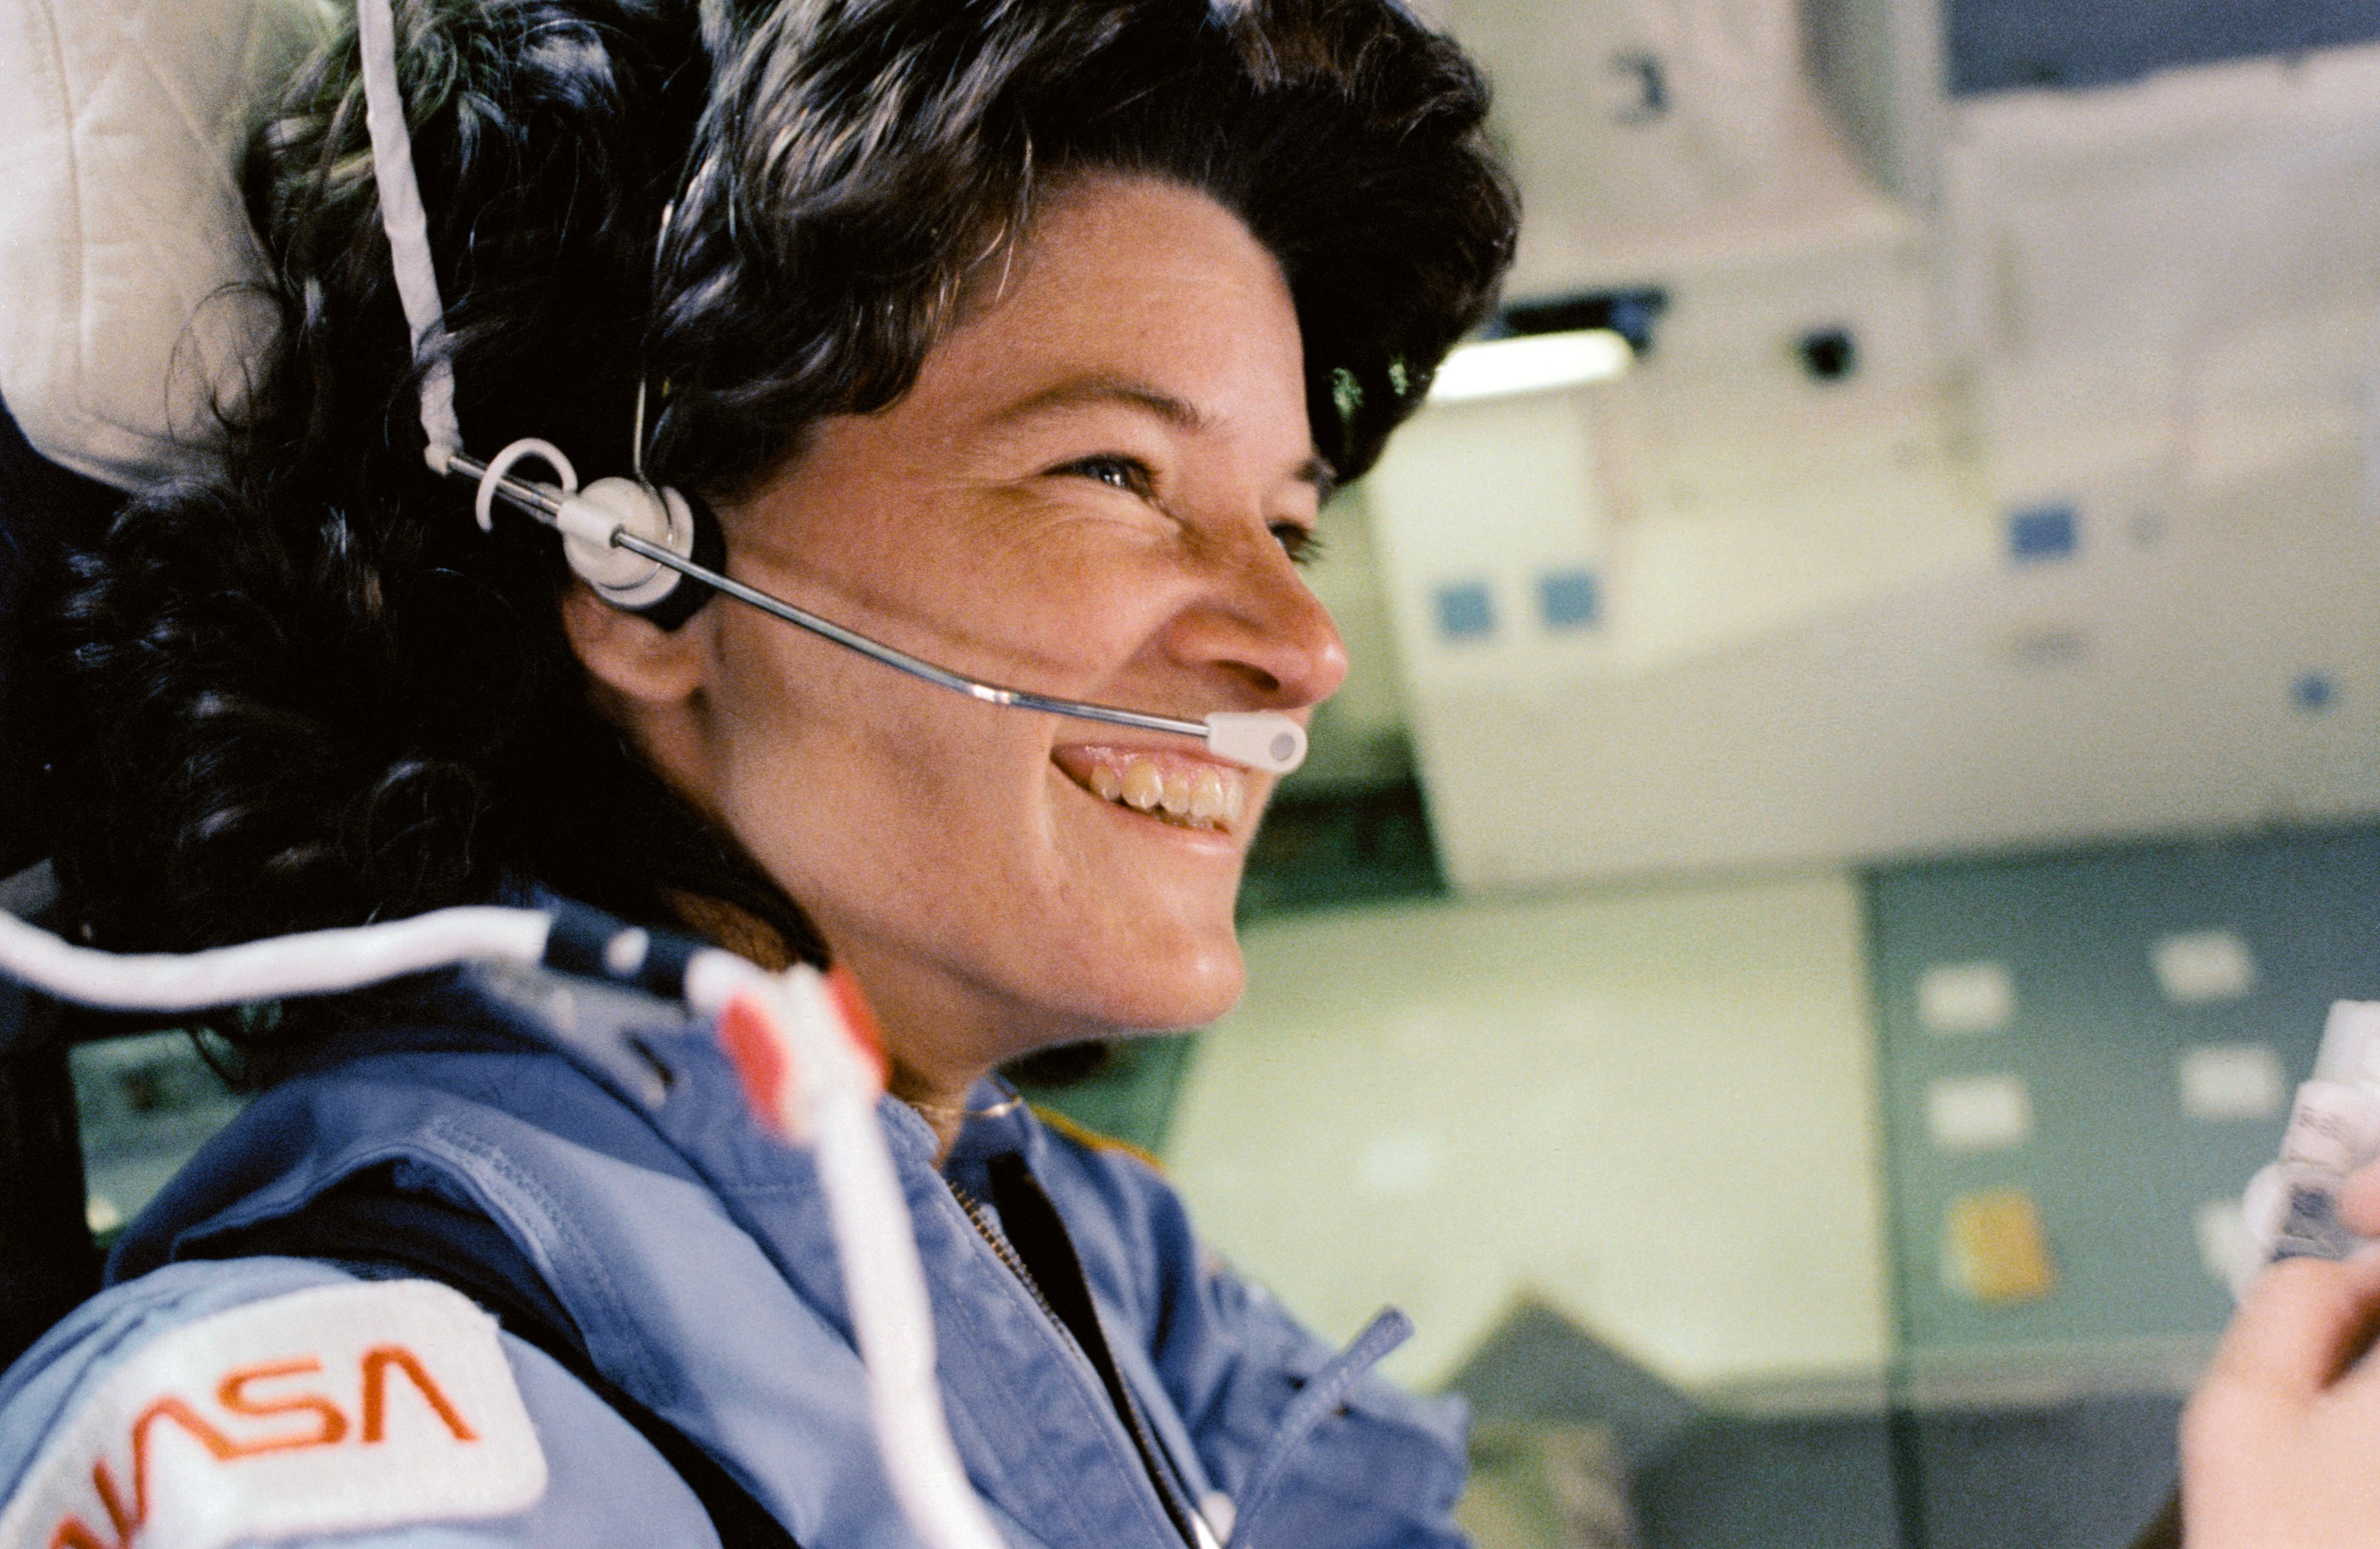 Tributes Mount As Sally Ride’s 30th Anniversary In Space Approaches